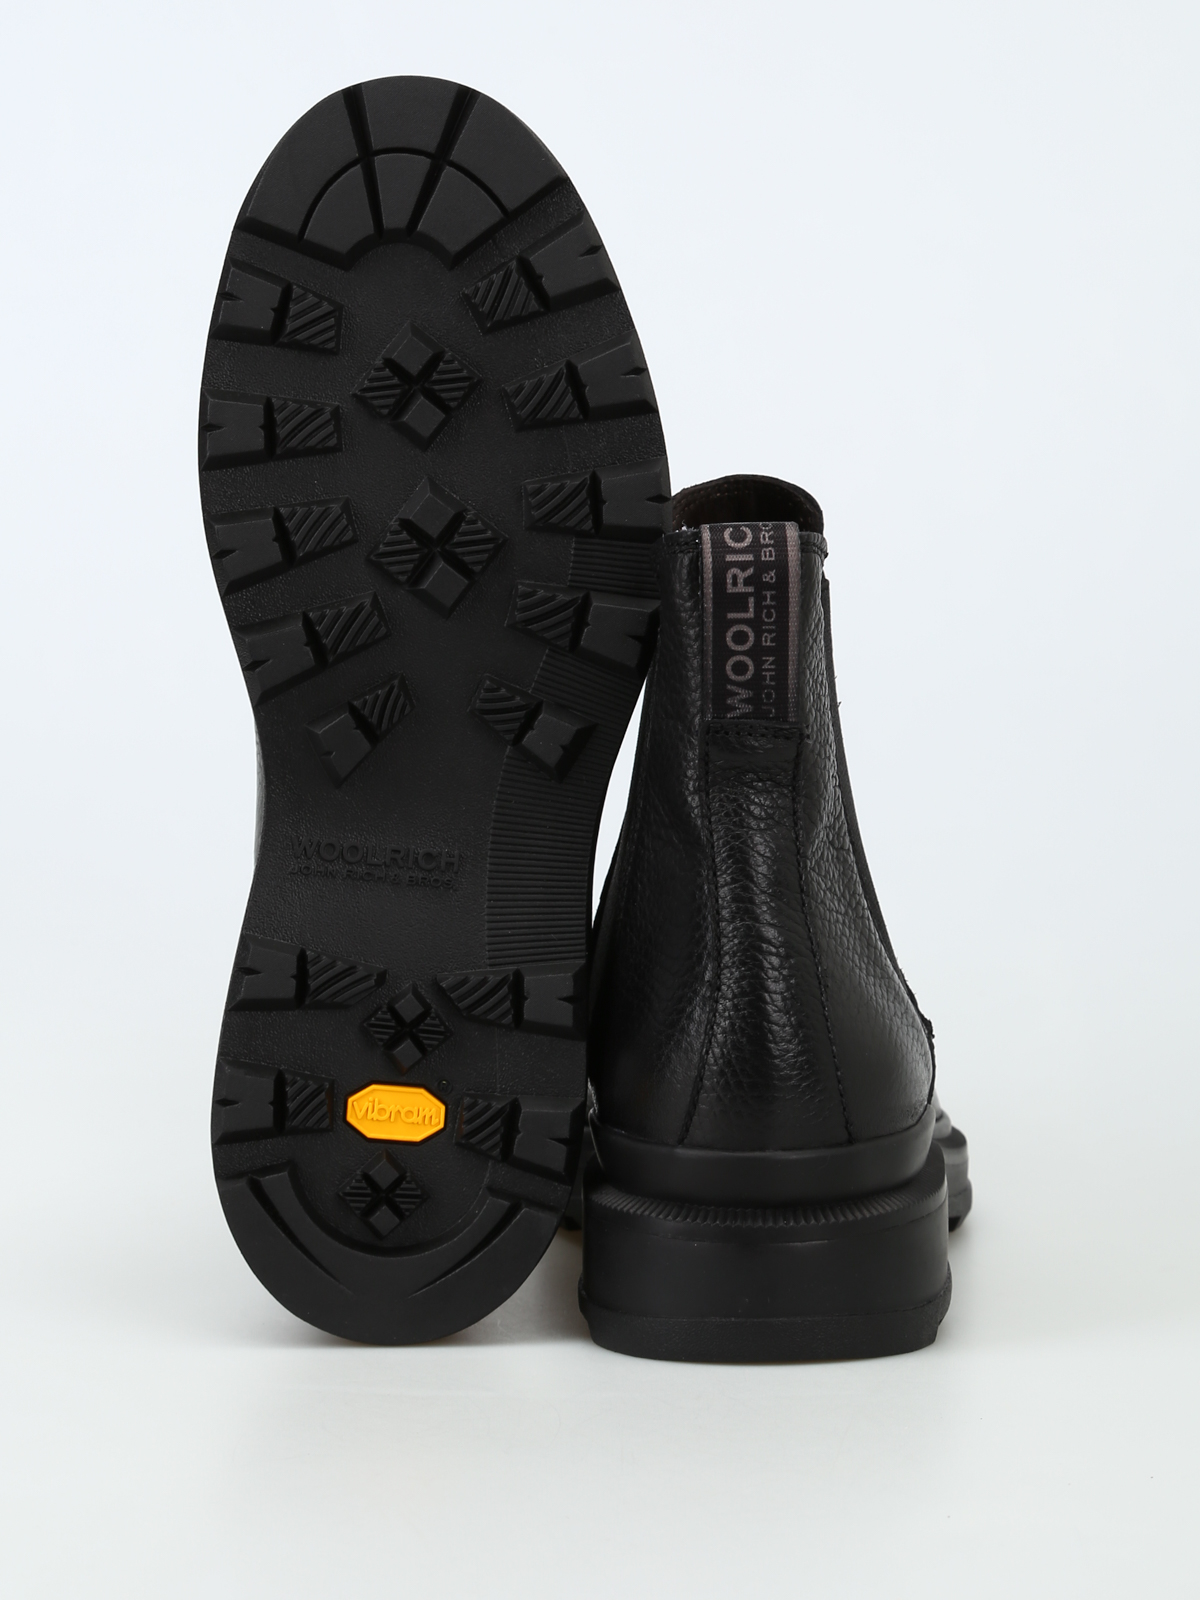 women's boots with vibram soles